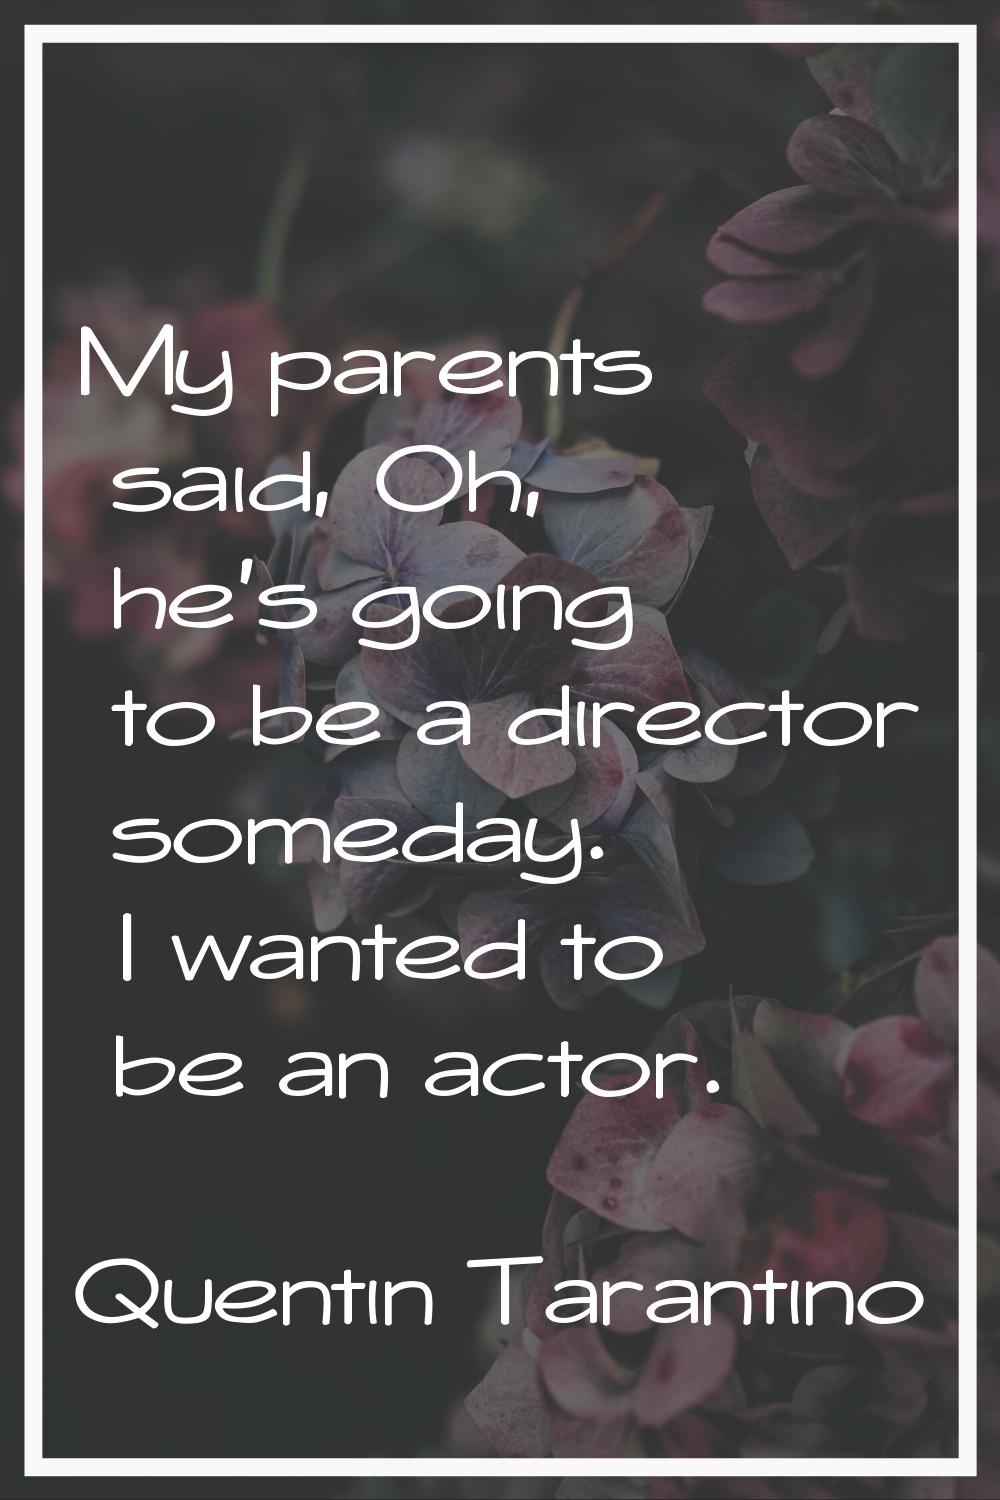 My parents said, Oh, he's going to be a director someday. I wanted to be an actor.